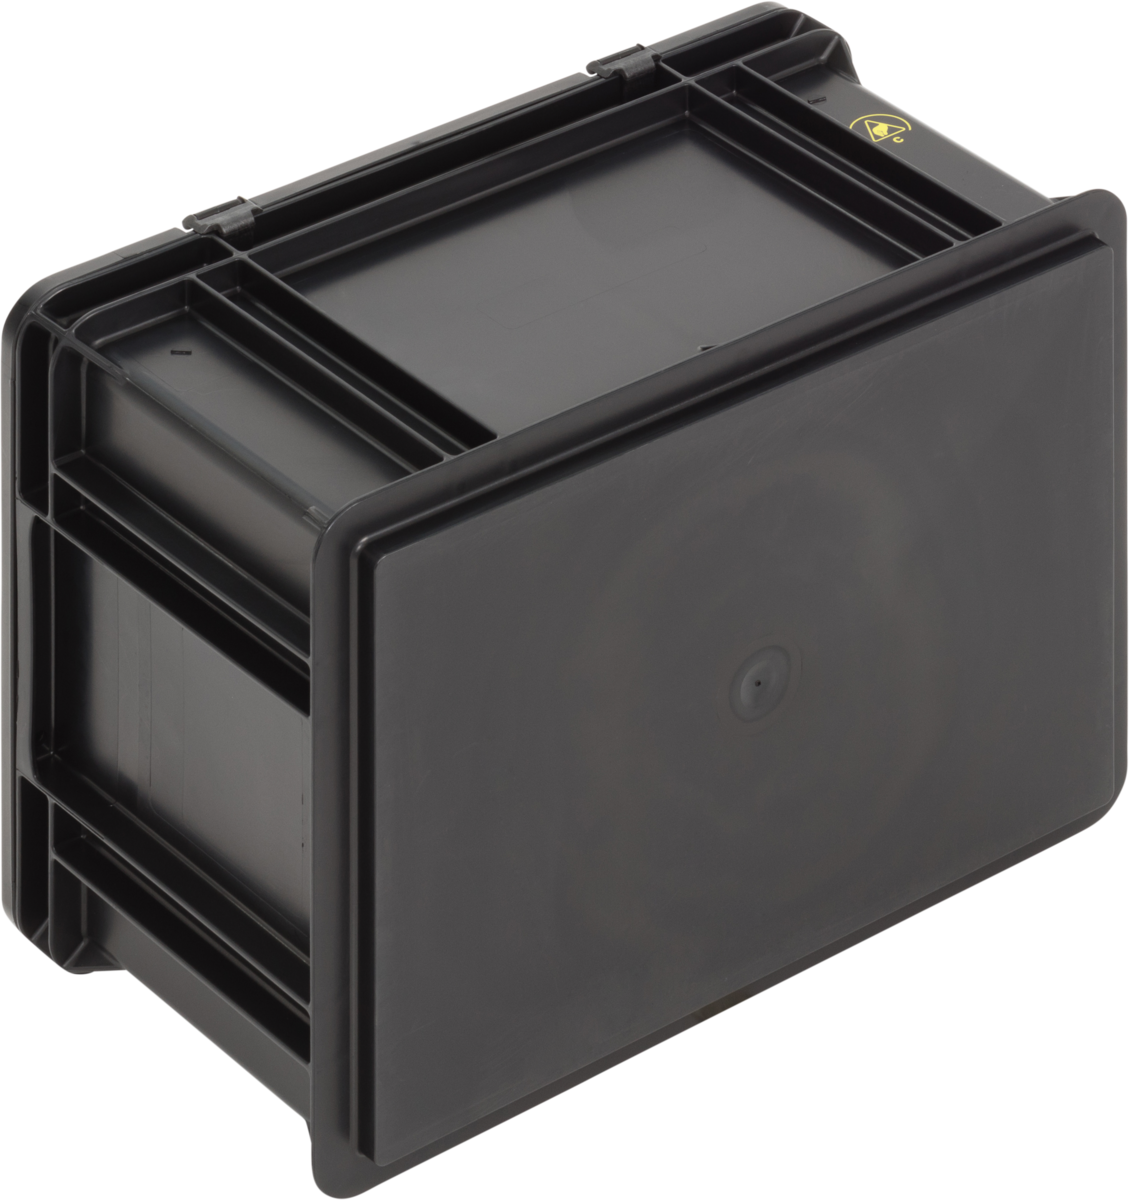 ESD-Safe-SGL-Norm-Carrying-Cases-Flat-Base-007-Ref.-4320.397.992_1004398_400x300x221_02